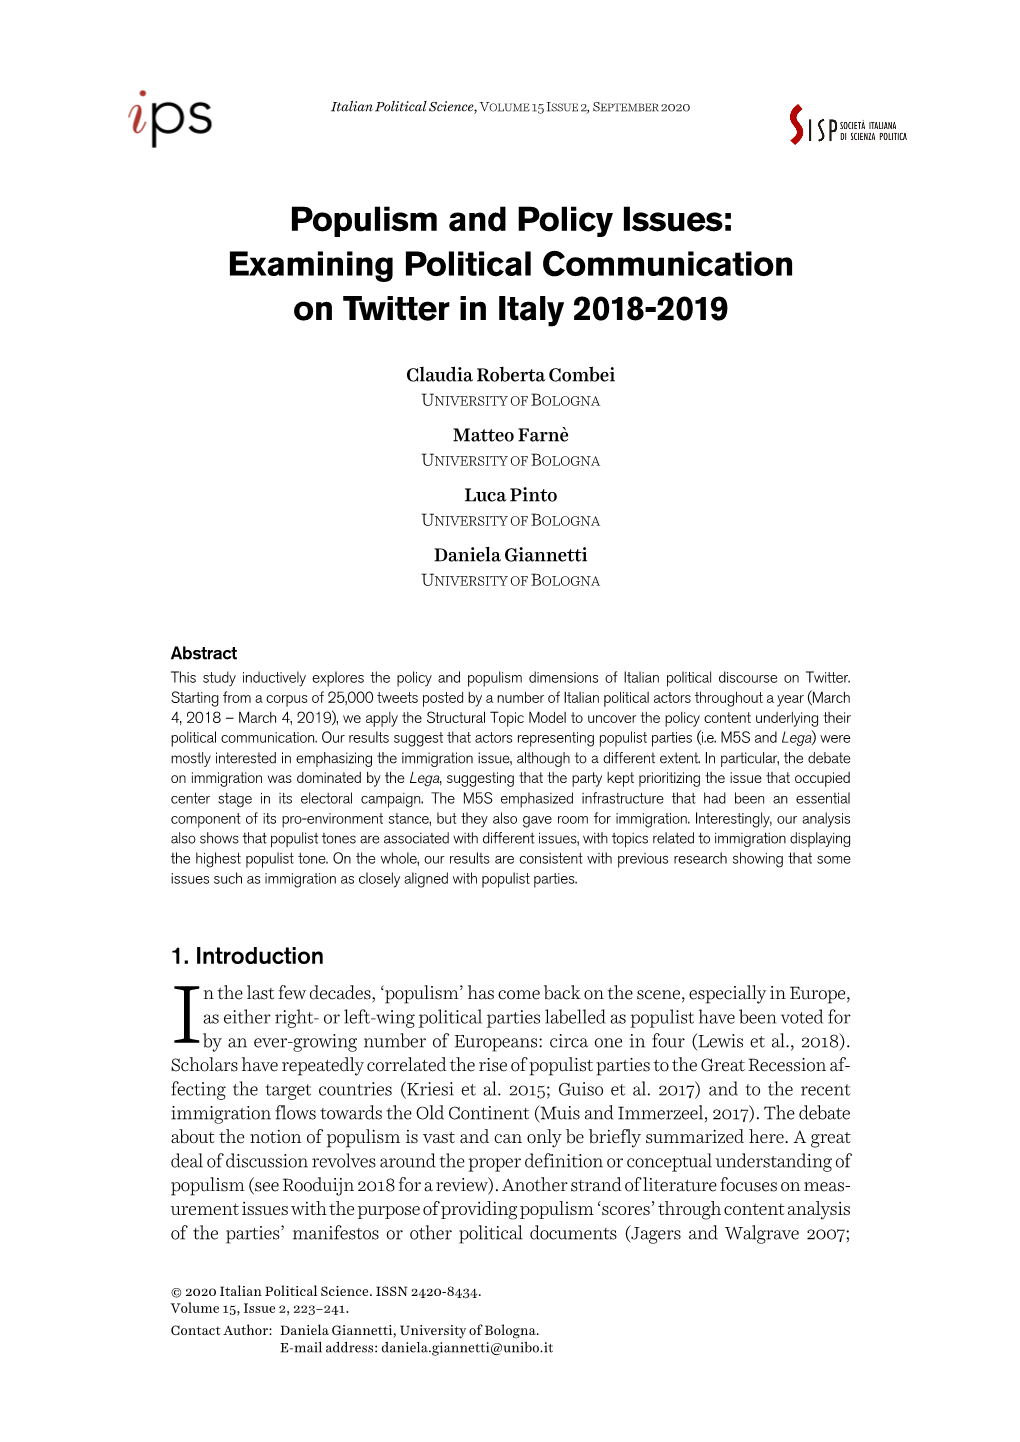 Populism and Policy Issues: Examining Political Communication on Twitter in Italy 2018-2019